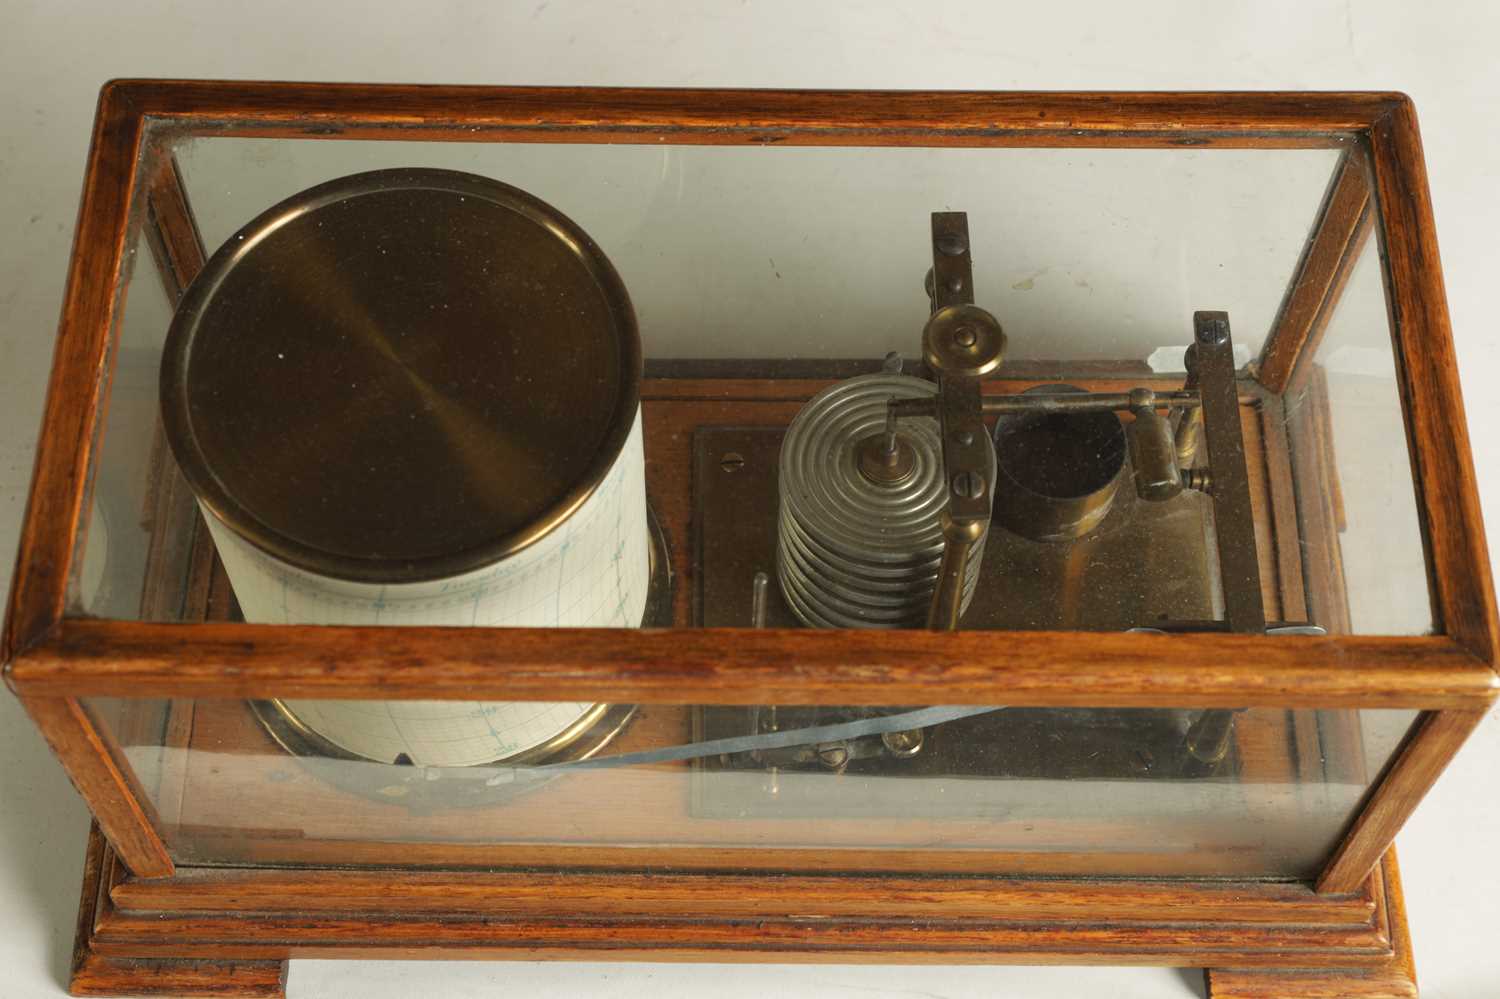 ROSS. LONDON A LATE 19TH/EARLY 20TH CENTURY OAK-CASED BAROGRAPH - Image 3 of 7